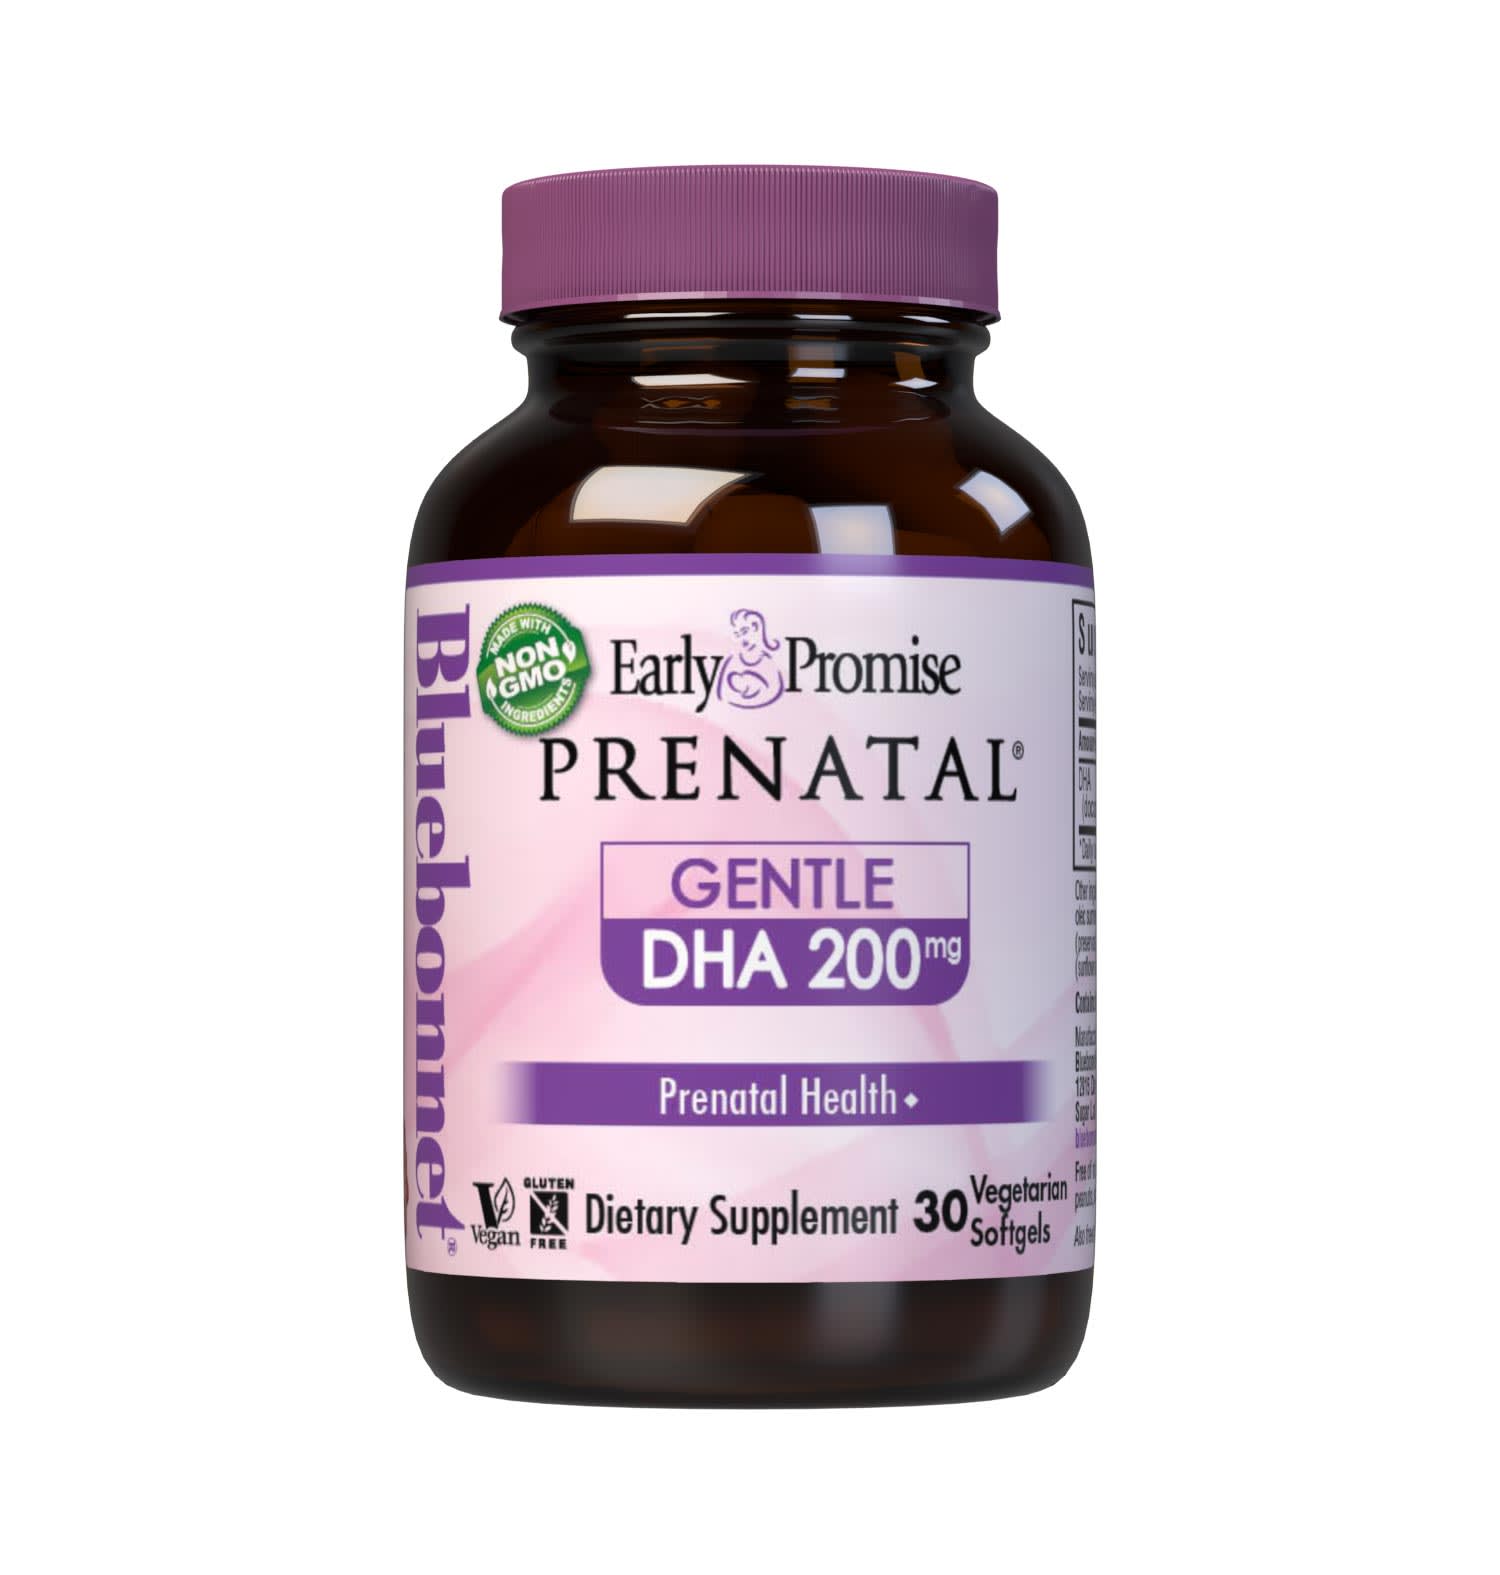 Early Promise Prenatal Gentle DHA 200 mg 30 Vegetarian Softgels are formulated with life'sDHA, a vegetable-based docosahexaenoic acid (DHA) in a triglyceride form derived from marine algae. Life'sDHA™ is the perfect complement to any woman's diet during pregnancy and/or lactation. #size_30 count